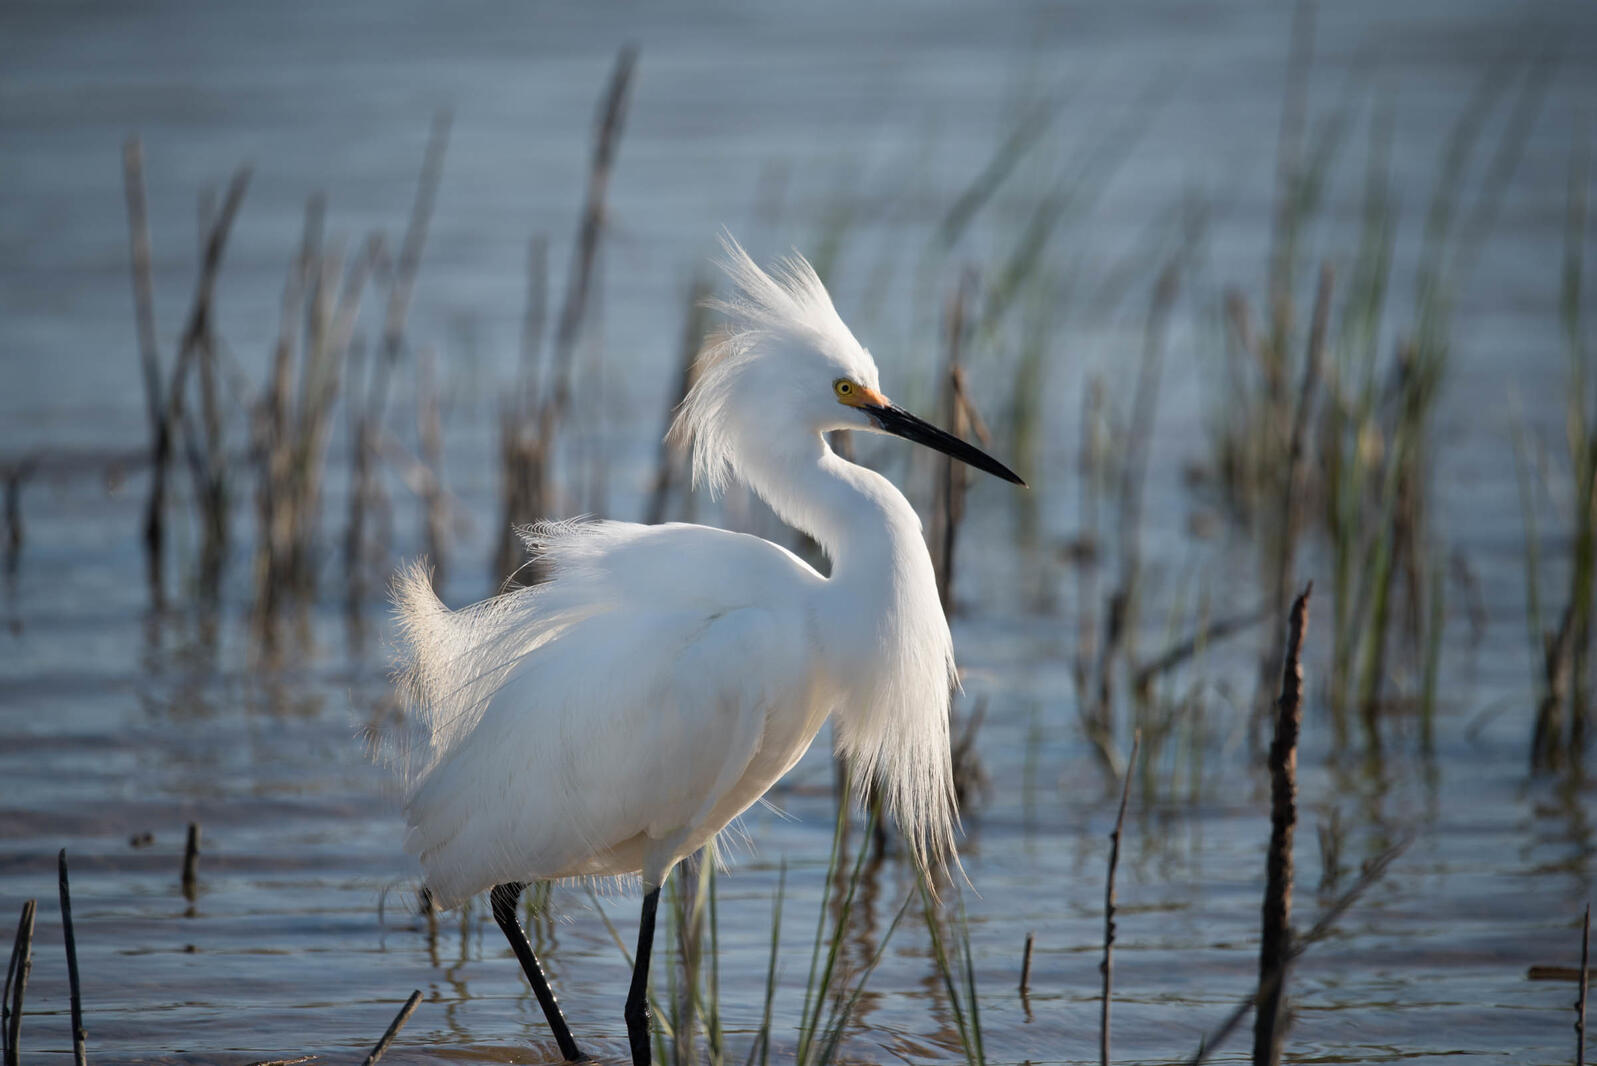 A Snowy Egret wading in shallow water.